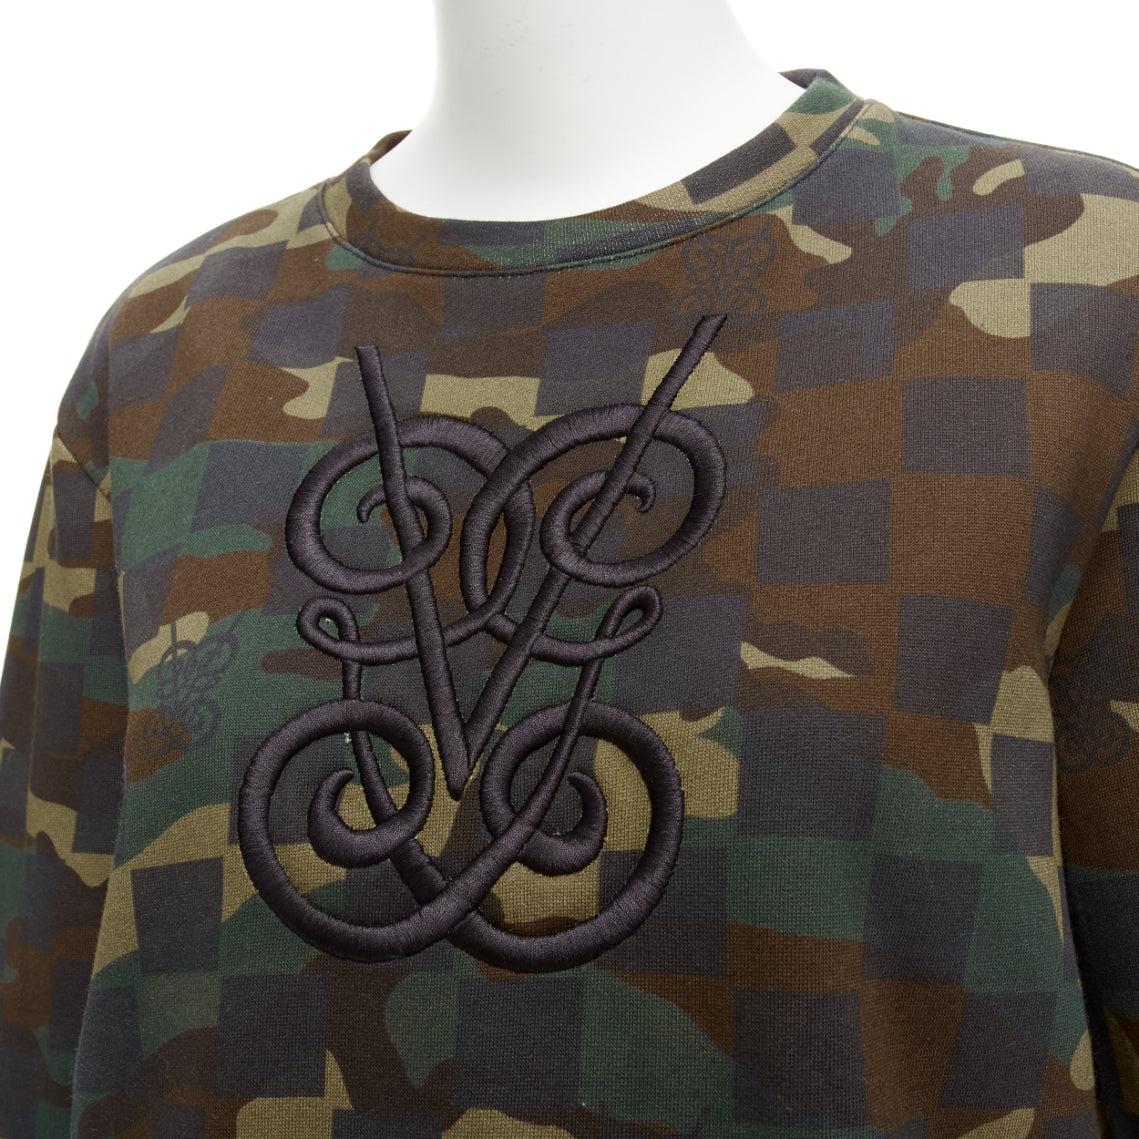 GIAMBATTISTA VALLI green graphic camouflage logo embroidery crew sweatshirt XS
Reference: AAWC/A01107
Brand: Giambattista Valli
Material: Cotton
Color: Green
Pattern: Camouflage
Closure: Pullover
Made in: Italy

CONDITION:
Condition: Excellent, this